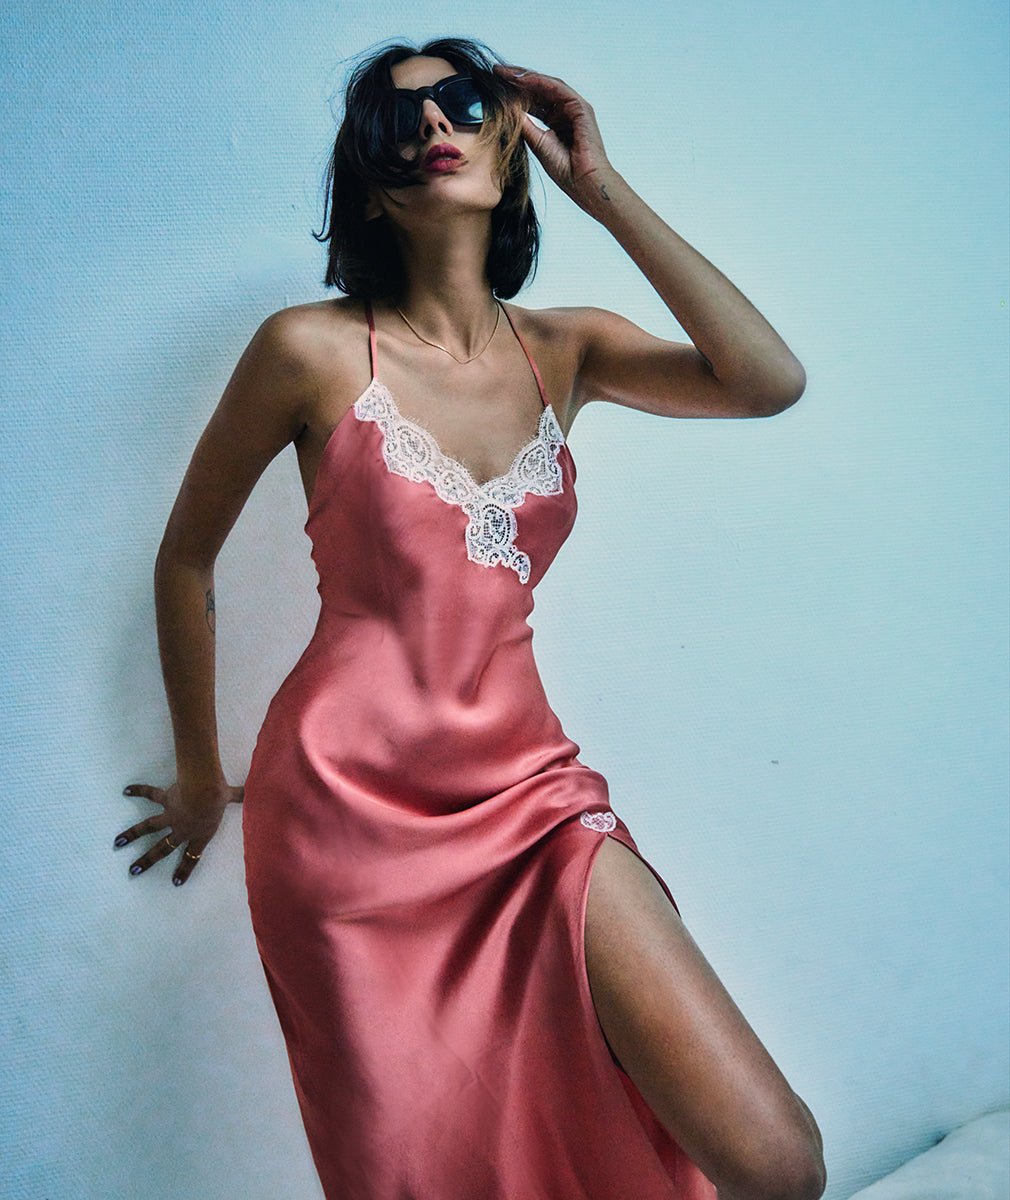 Long Satin Silk Nightgown with Front Slit, in Terracotta - Ariane Delarue Lingerie